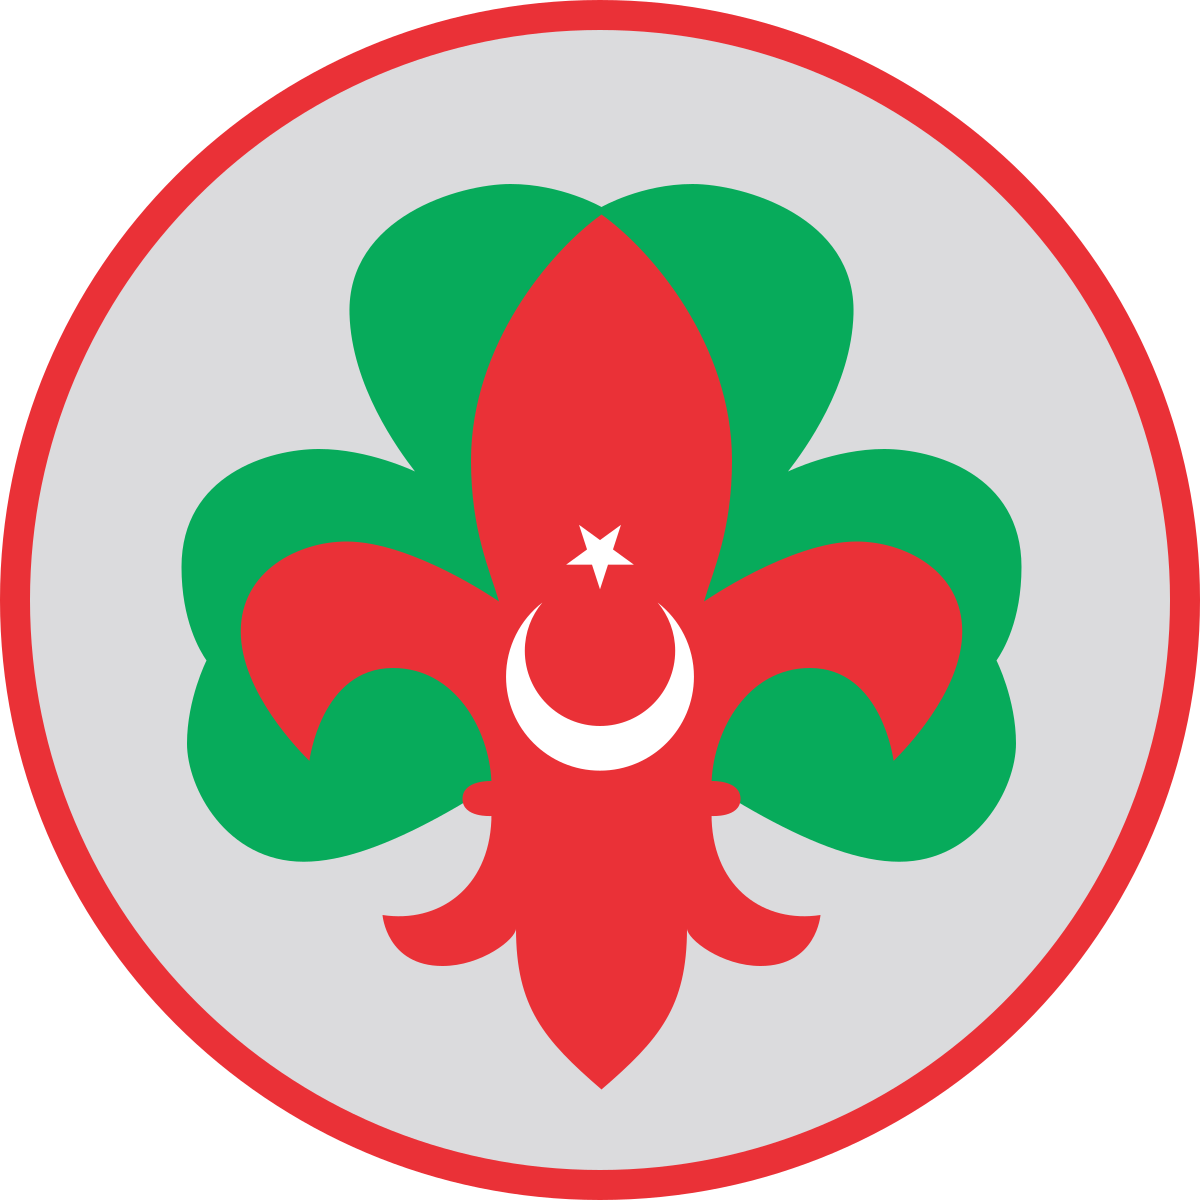 Scouting And Guiding Federation Of Turkey (1200x1200)